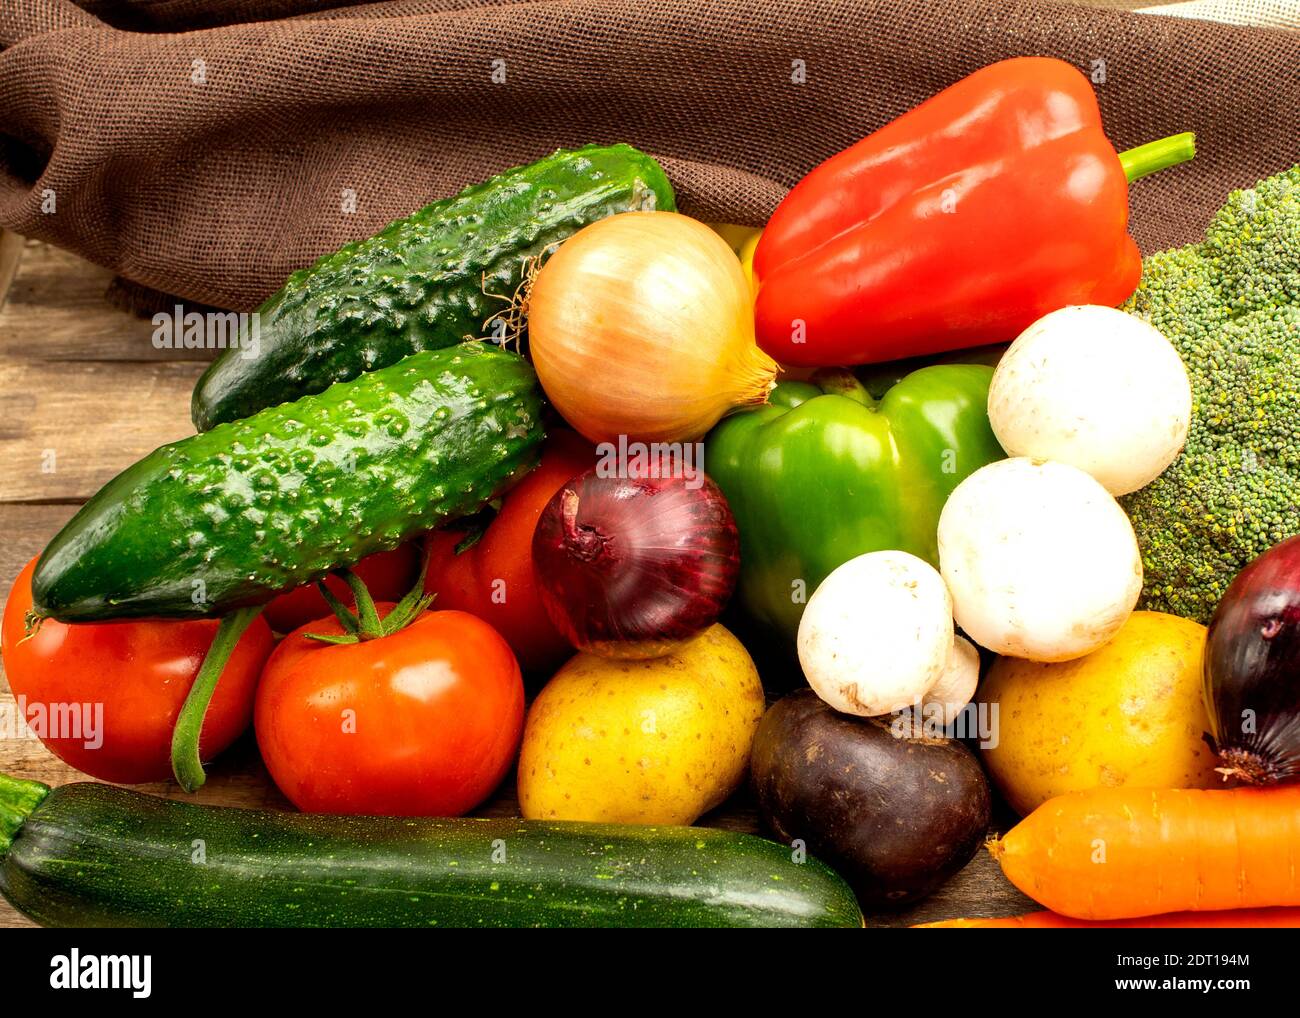 Fresh vegetables on wooden background, side view. Homemade vegetables carrots, blue onions, mushrooms, cucumber, paprika, tomato Stock Photo